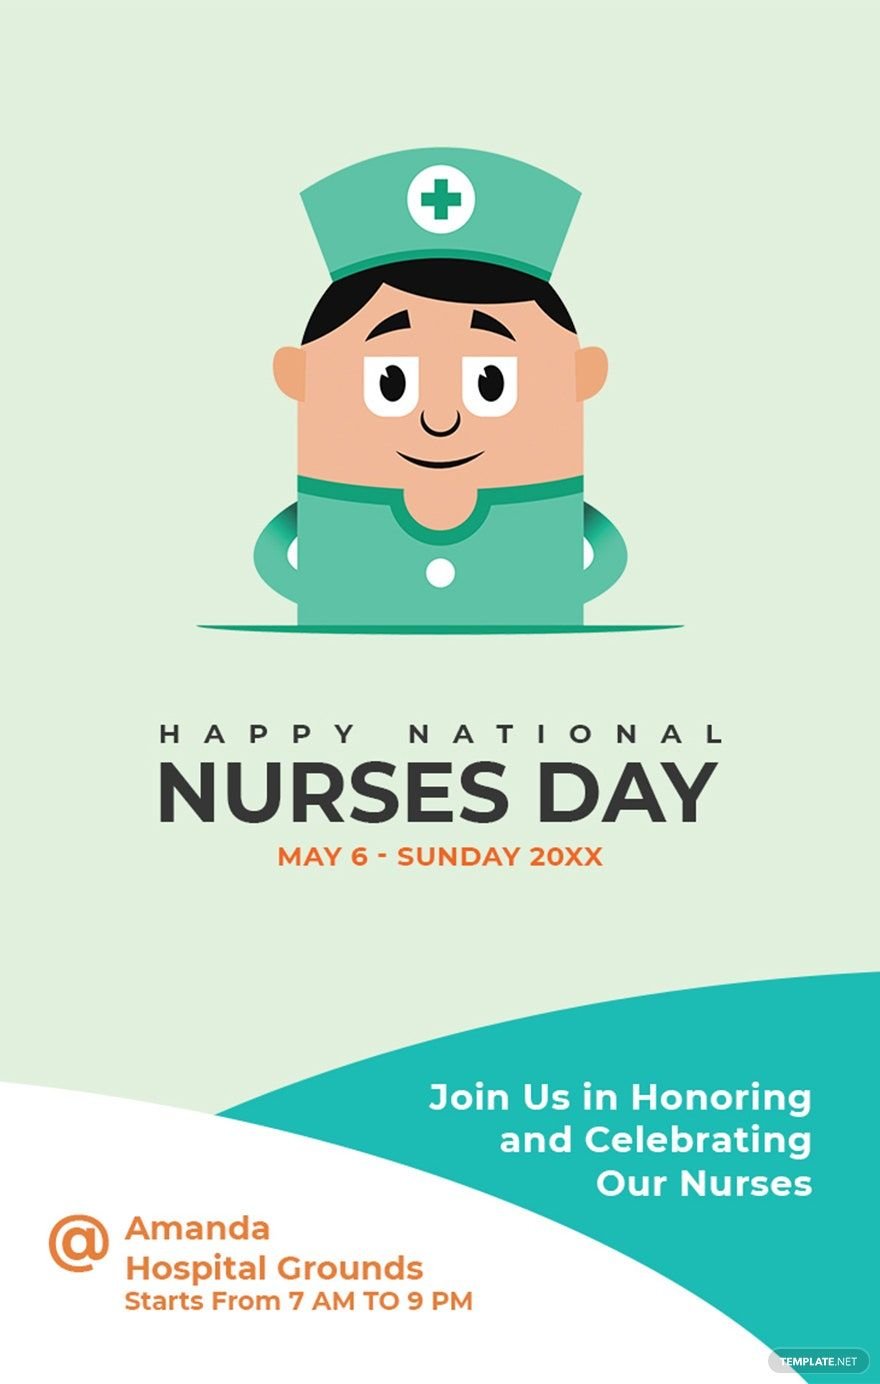 Free Nurses Day Pinterest Pin Template in PSD